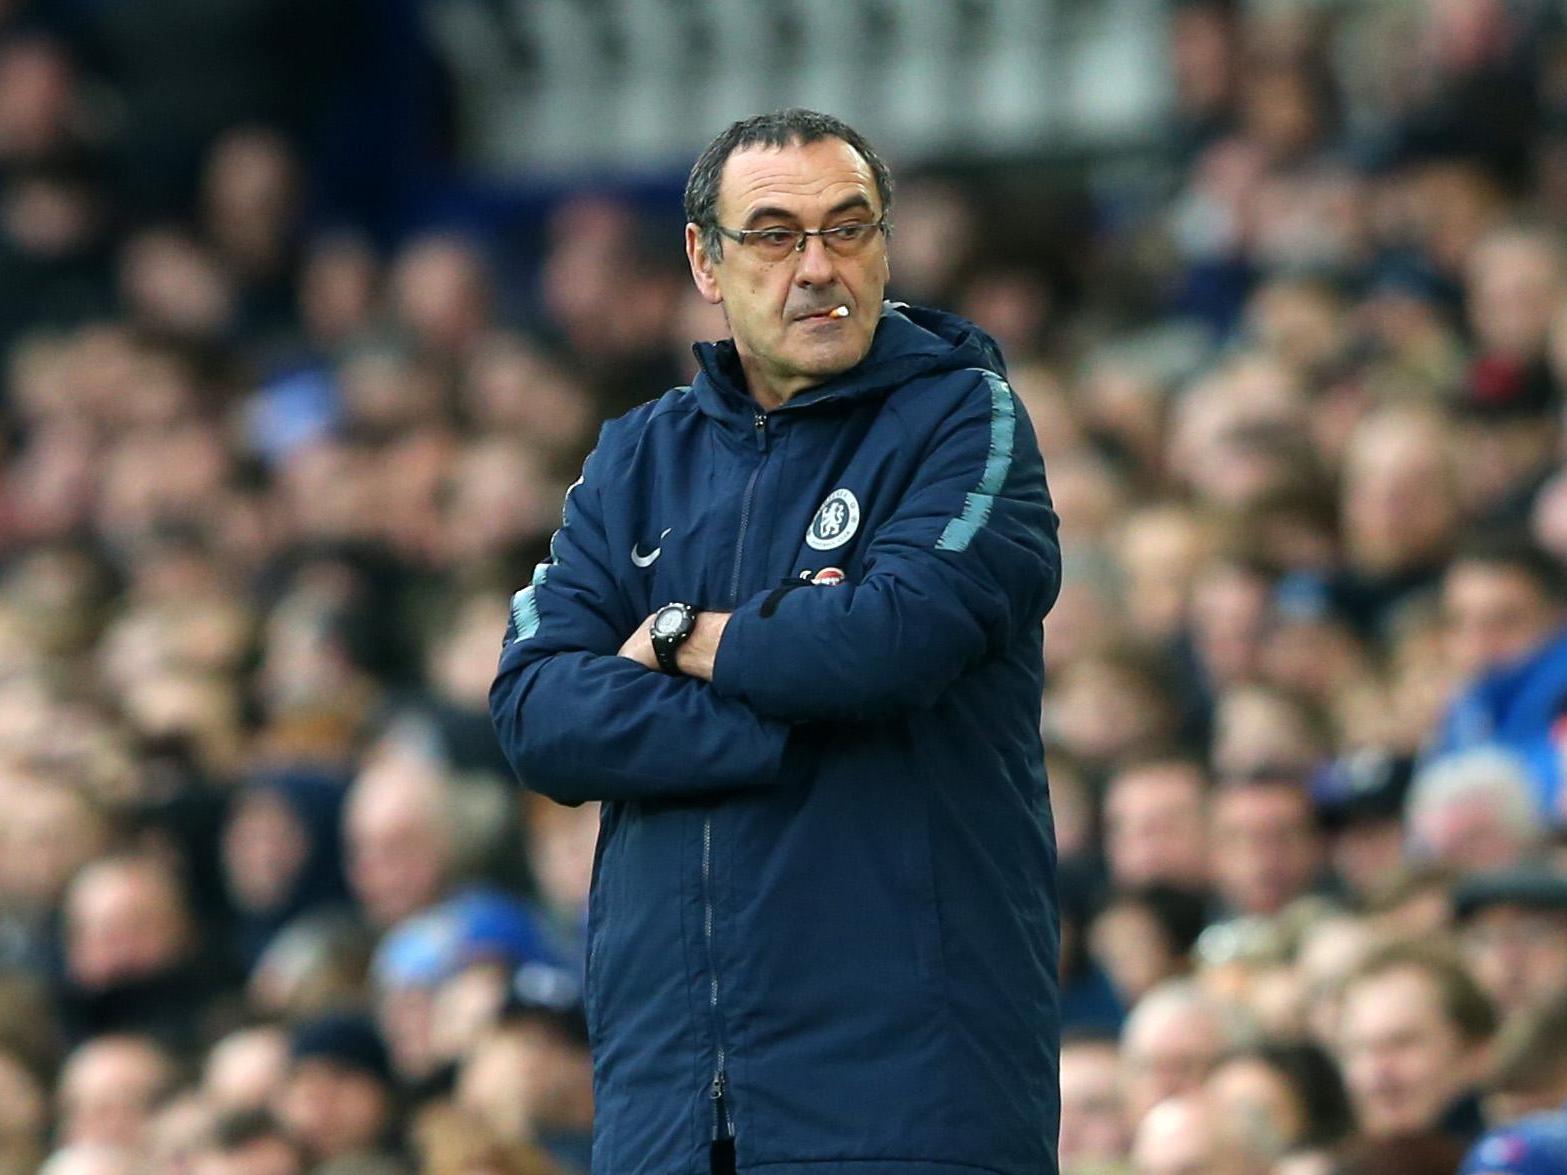 Everton vs Chelsea: Maurizio Sarri 'worried' by players' 'mental block' after defeat at Goodison Park